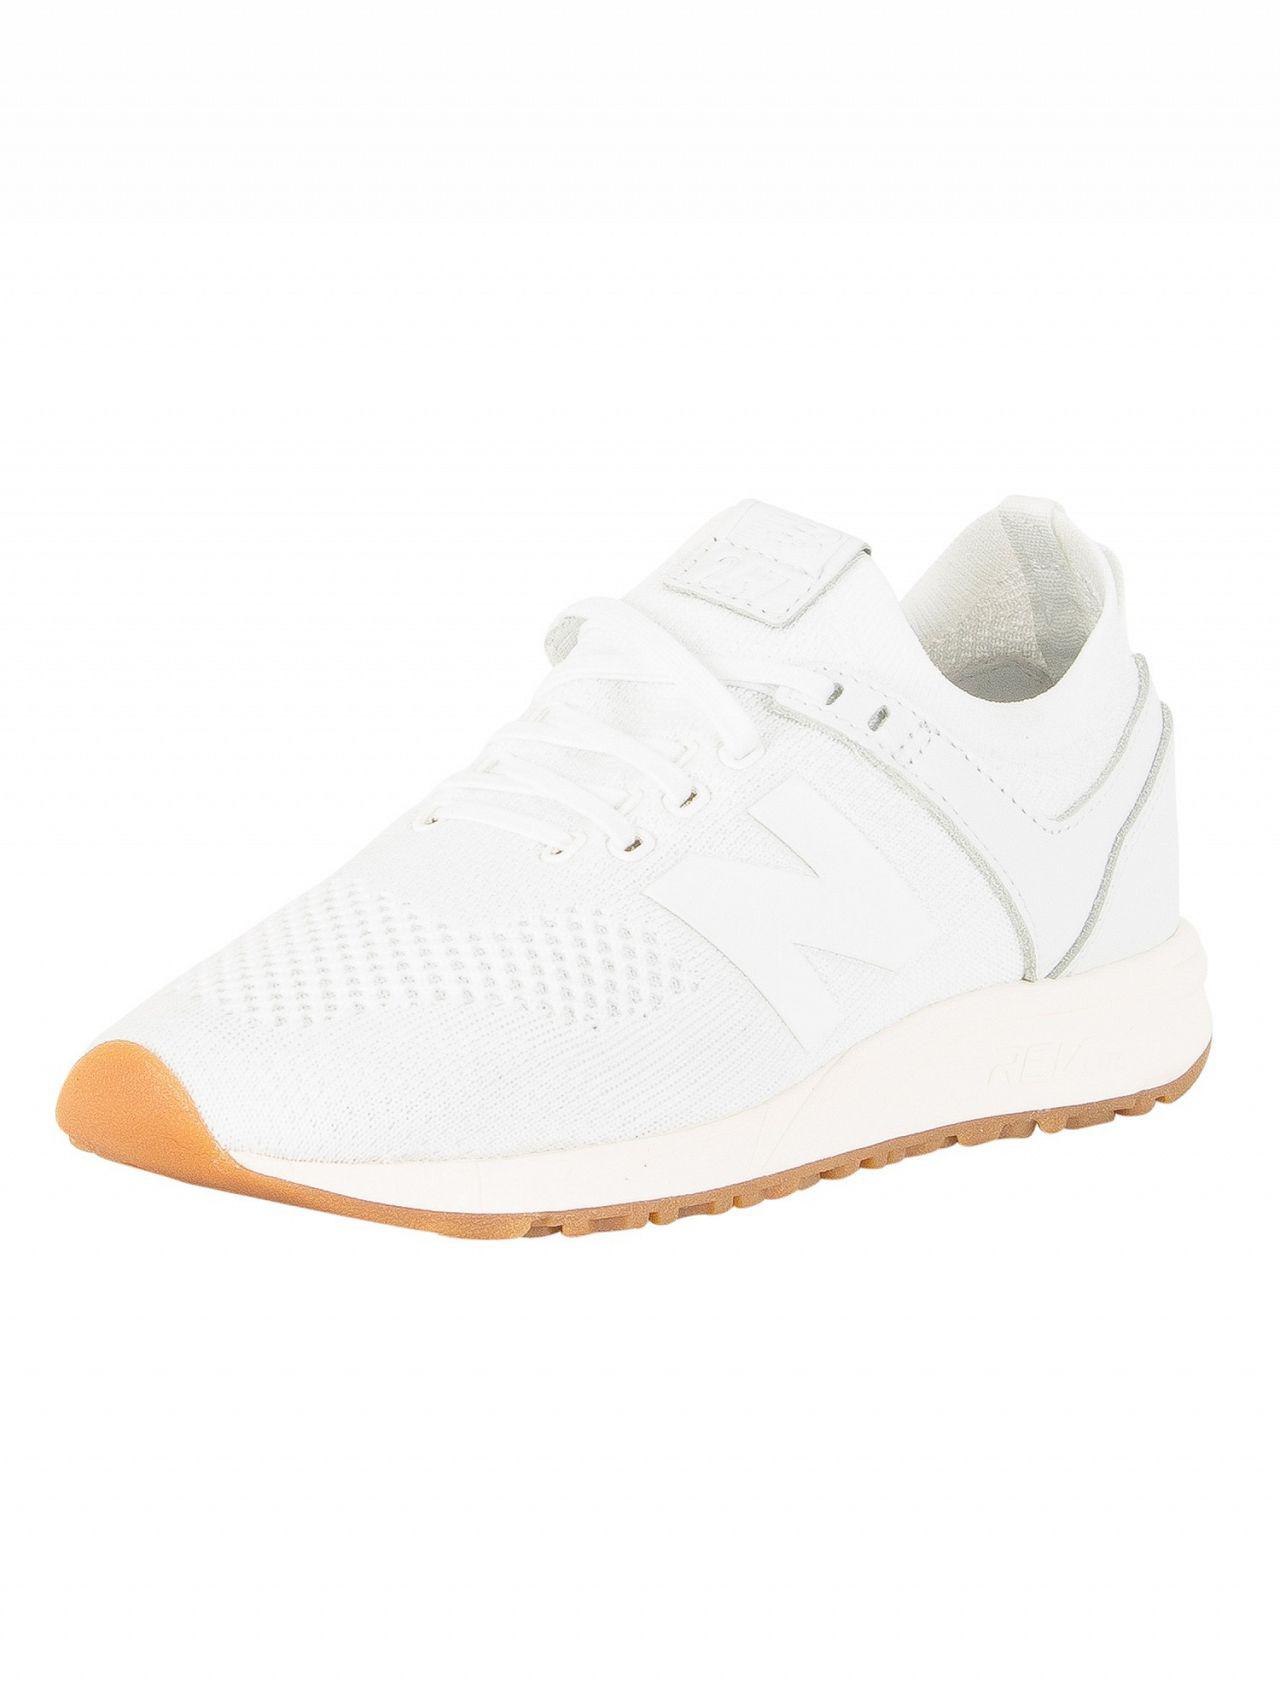 New Balance White/gum 247 Trainers for Men | Lyst